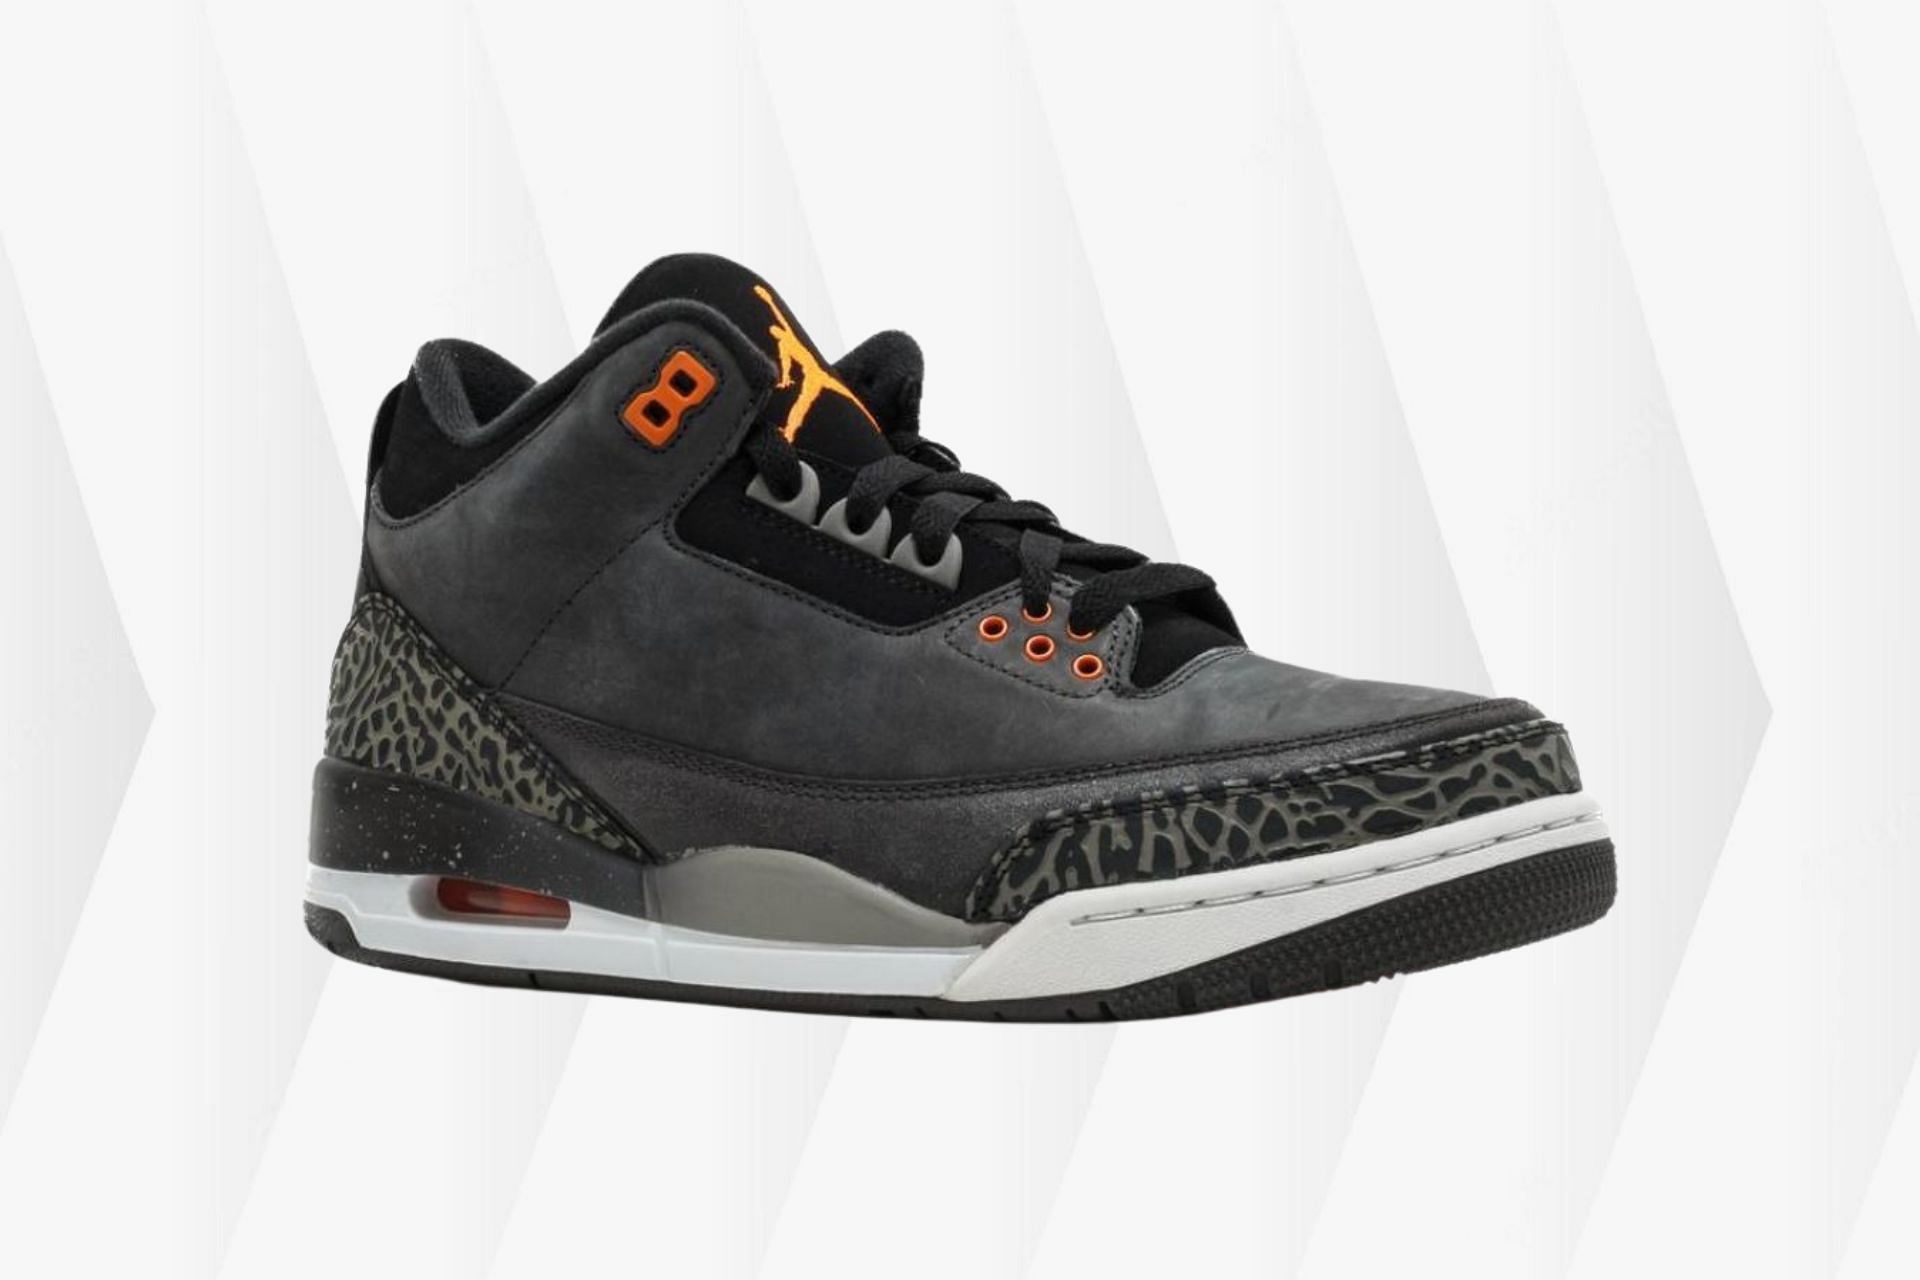 Fear Air Jordan 3 Retro “Fear” shoes Where to buy, price, and more